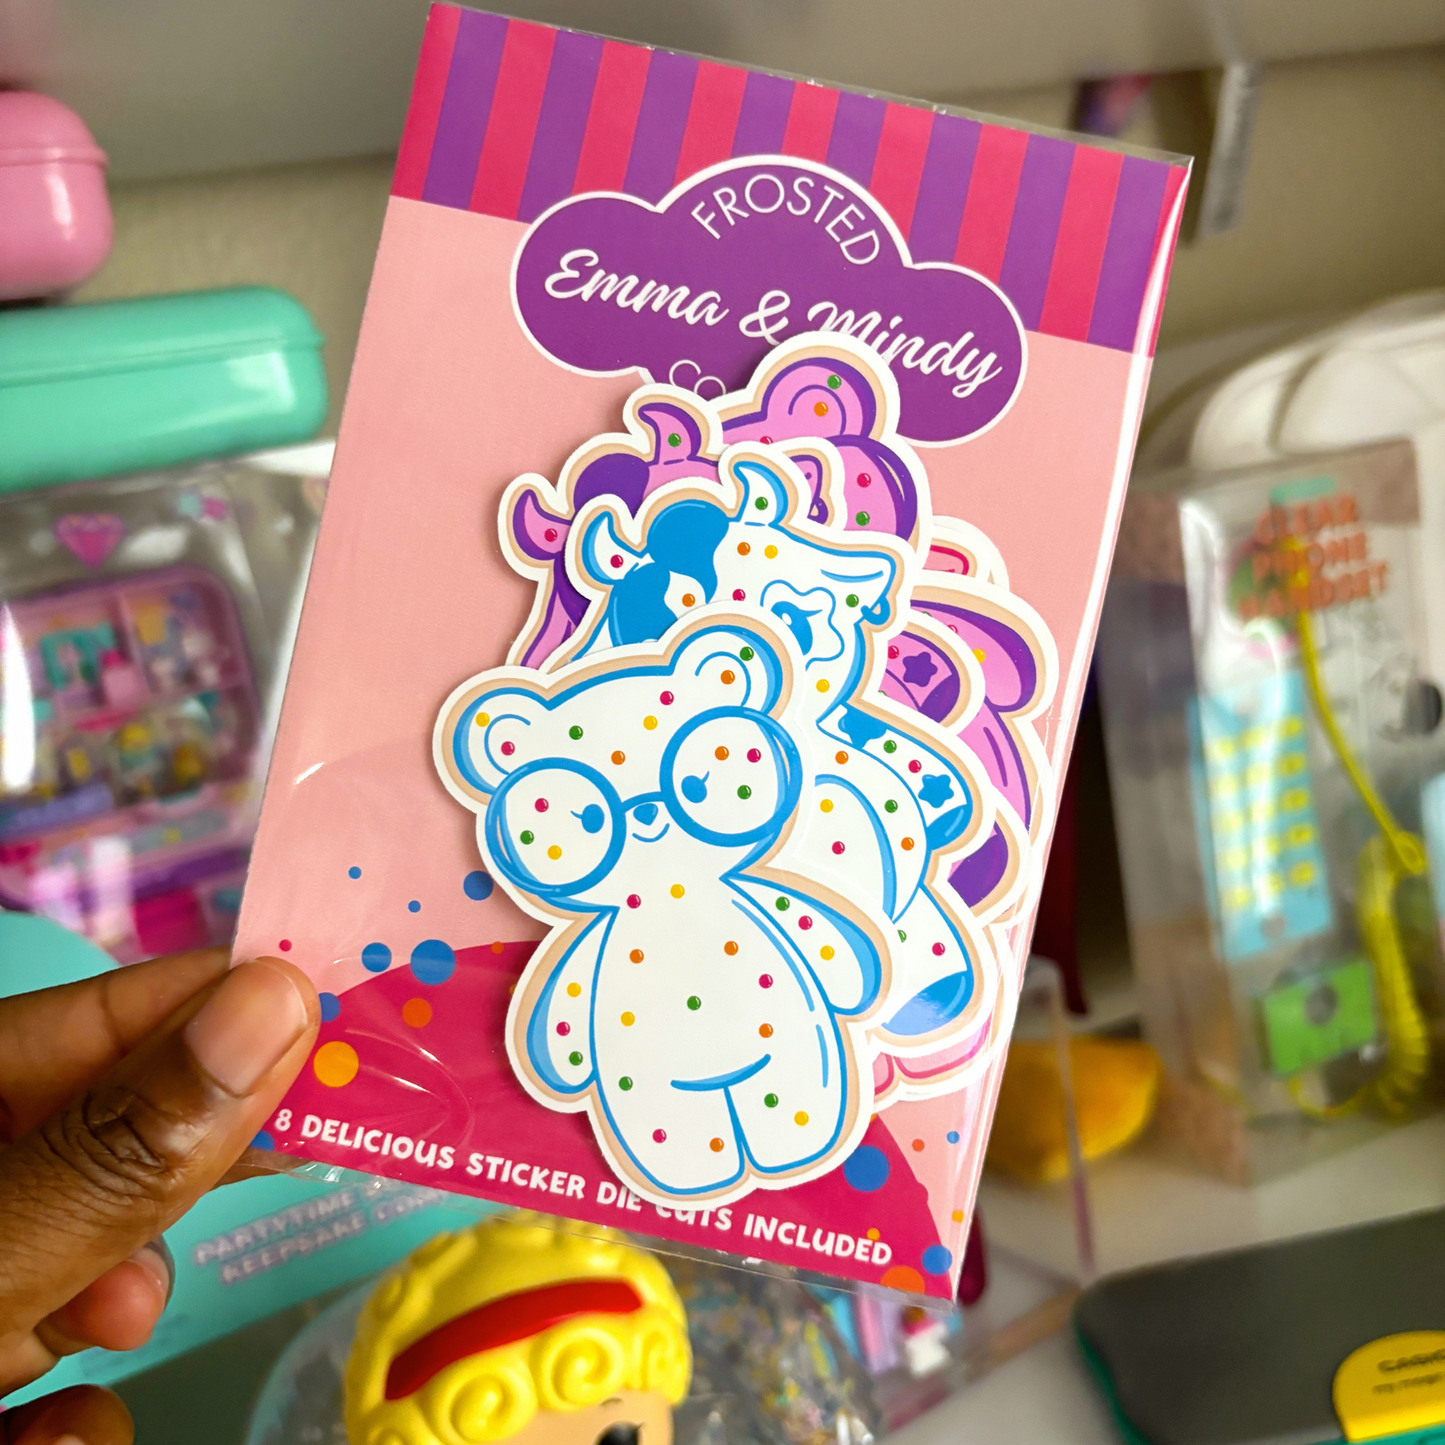 Frosted Yummy Cookies | Sticker Die Cuts